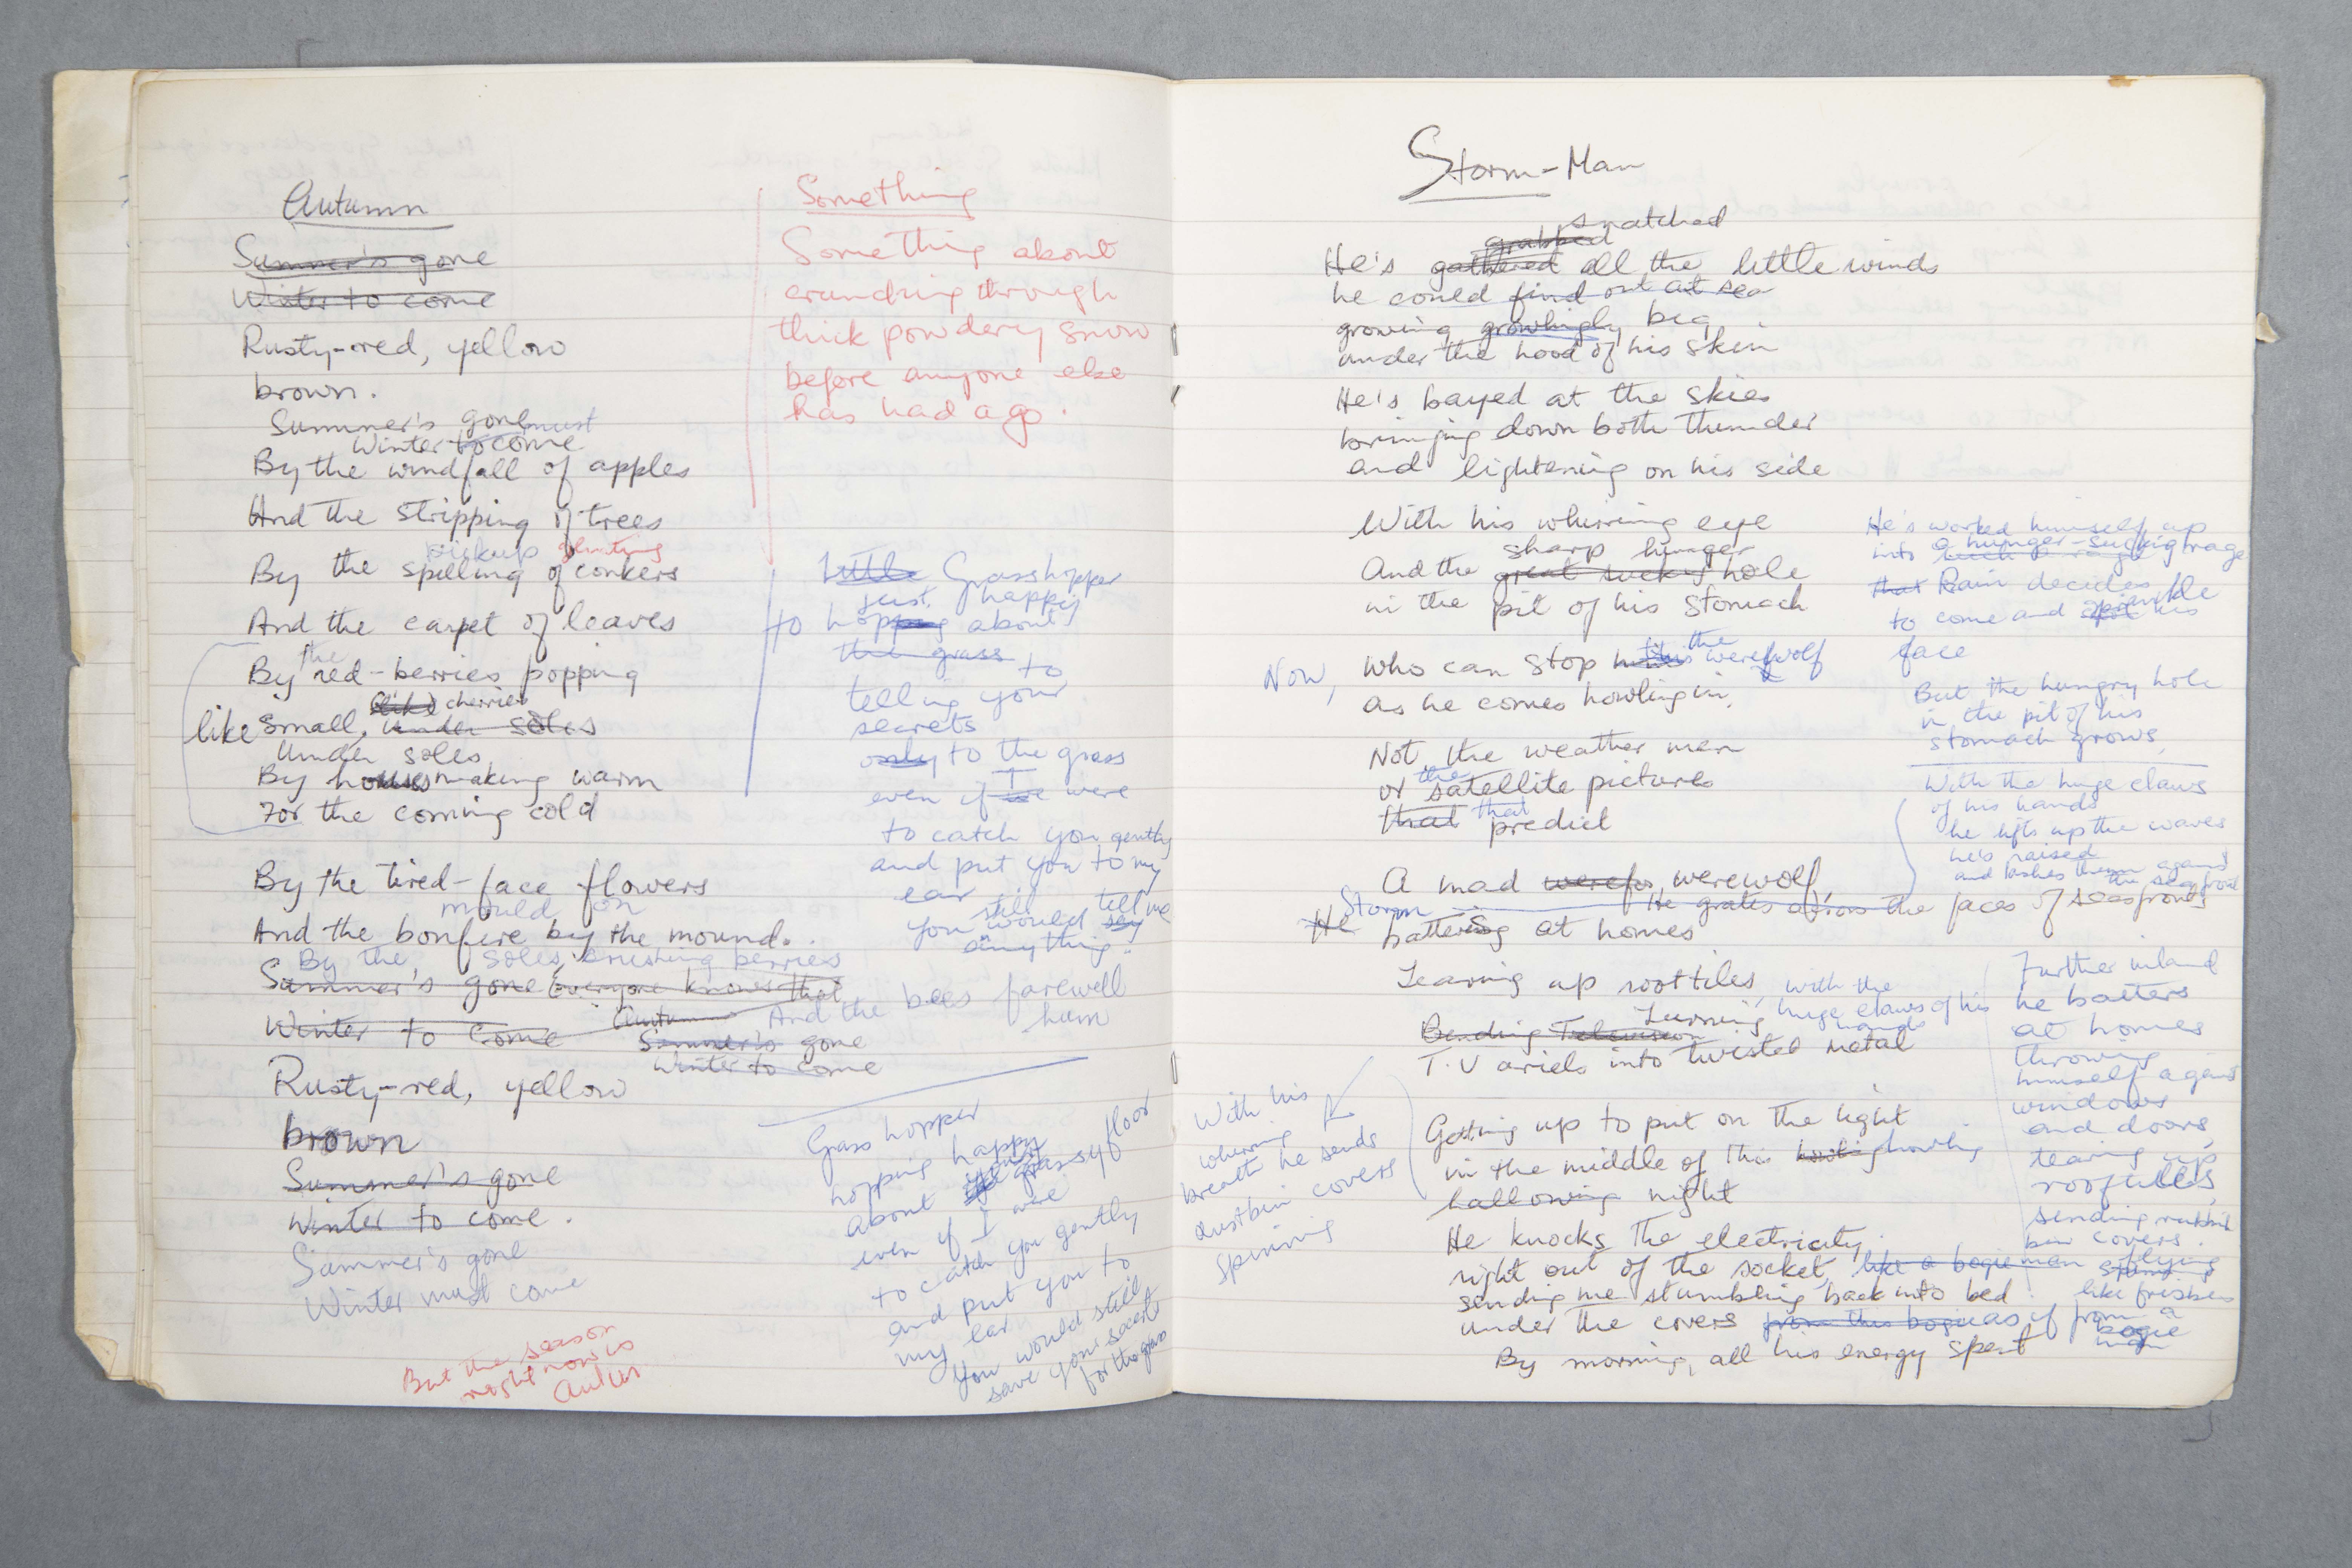 An opening from one of Grace Nichols' notebooks containing a manuscript draft of two poems, 'Autumn' and 'Storm-man'.